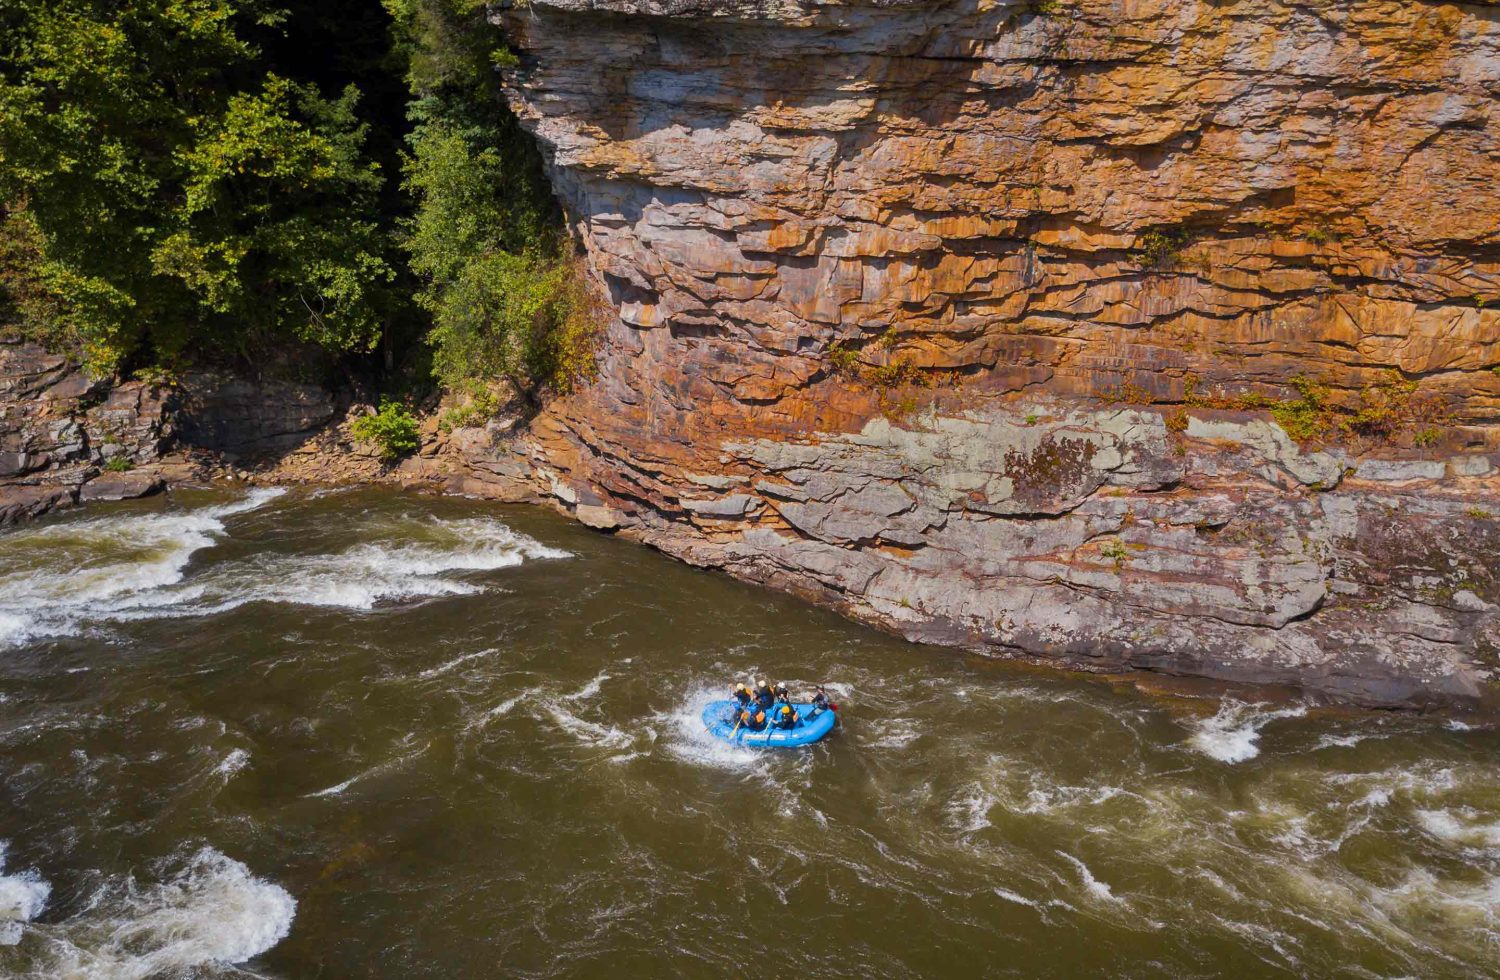 A raft passes the giant, sandstone cliffs of cliffside rapid on the Lower Gauley River.